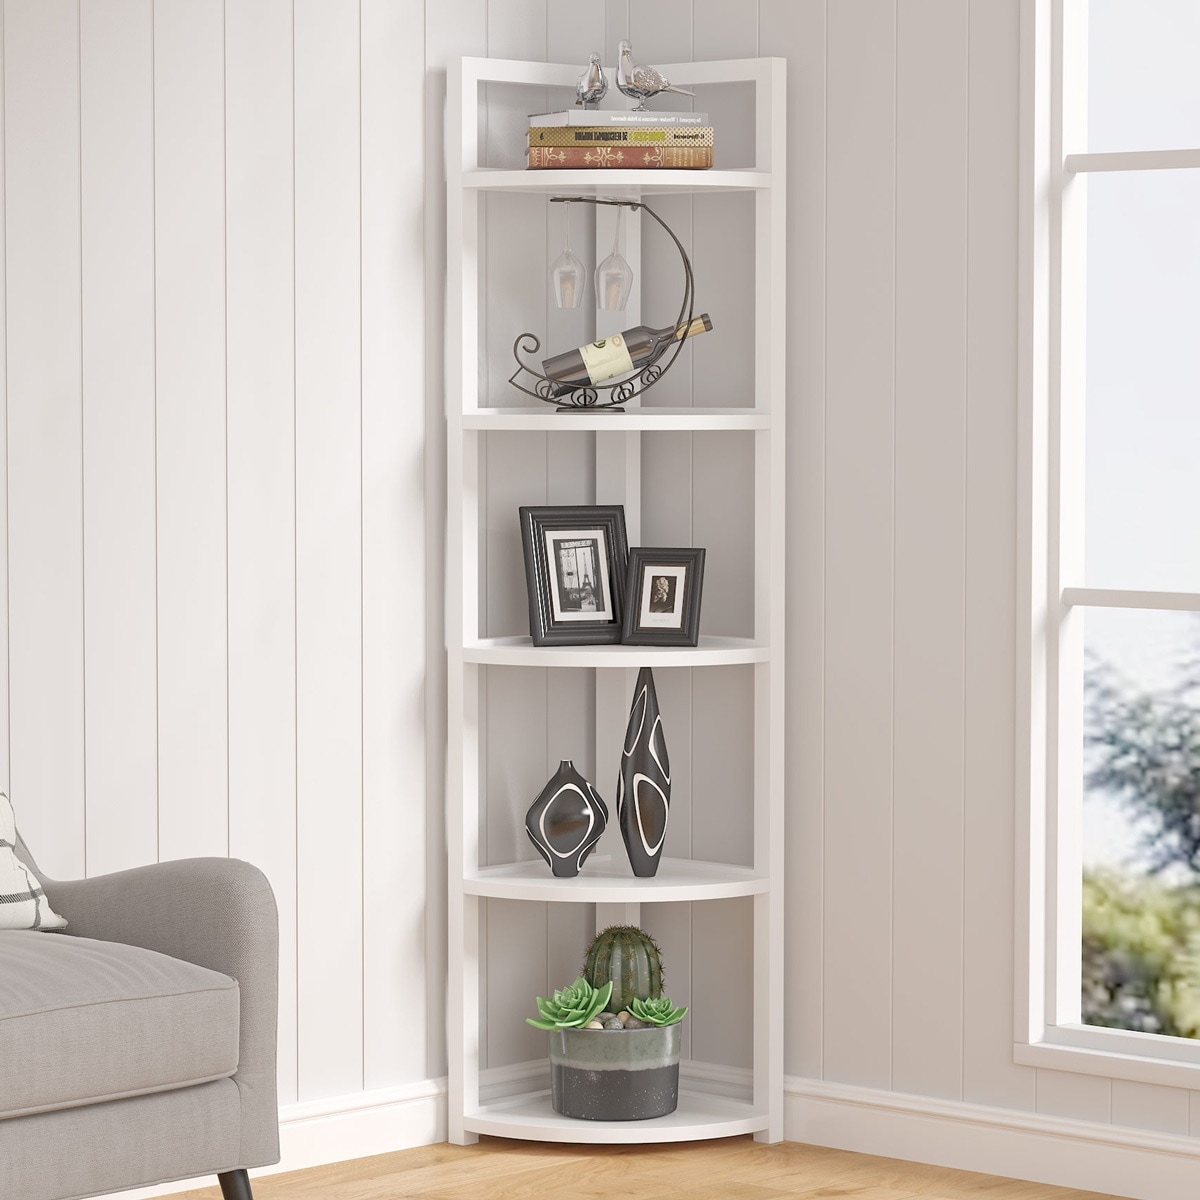 https://ak1.ostkcdn.com/images/products/is/images/direct/258d41cdf3646ea3ae8561a8511769e55218987e/5-Tier-Corner-Shelves%2C-Corner-Bookshelf-and-Bookcase-Indoor-Plant-Stand.jpg